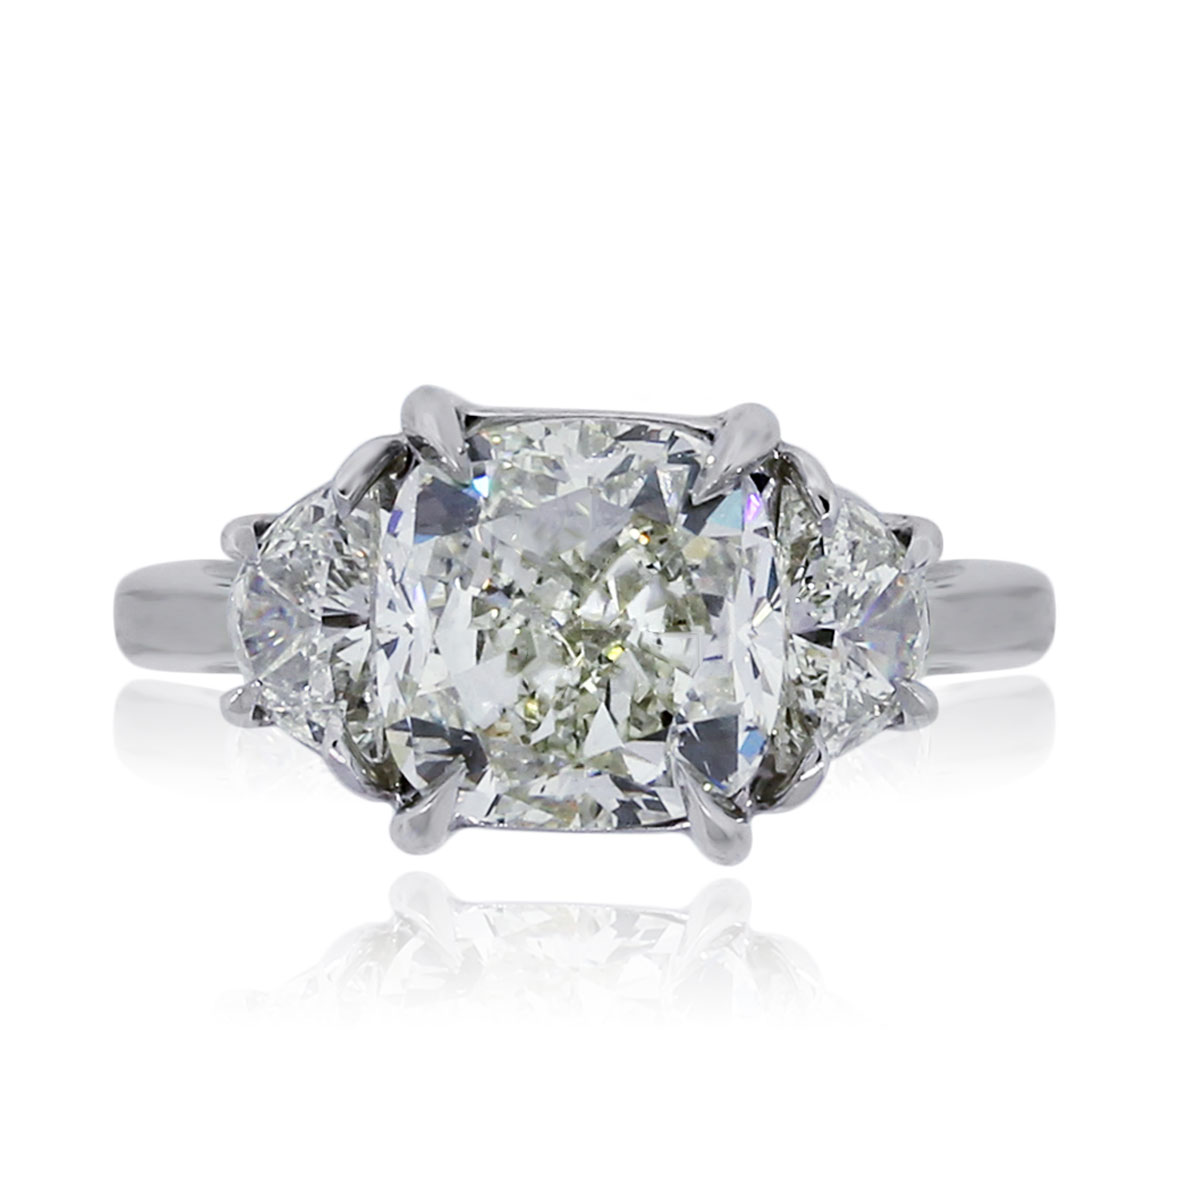 You are viewing this Platinum 4.02ct Cushion Cut Diamond Handmade Engagement Ring!